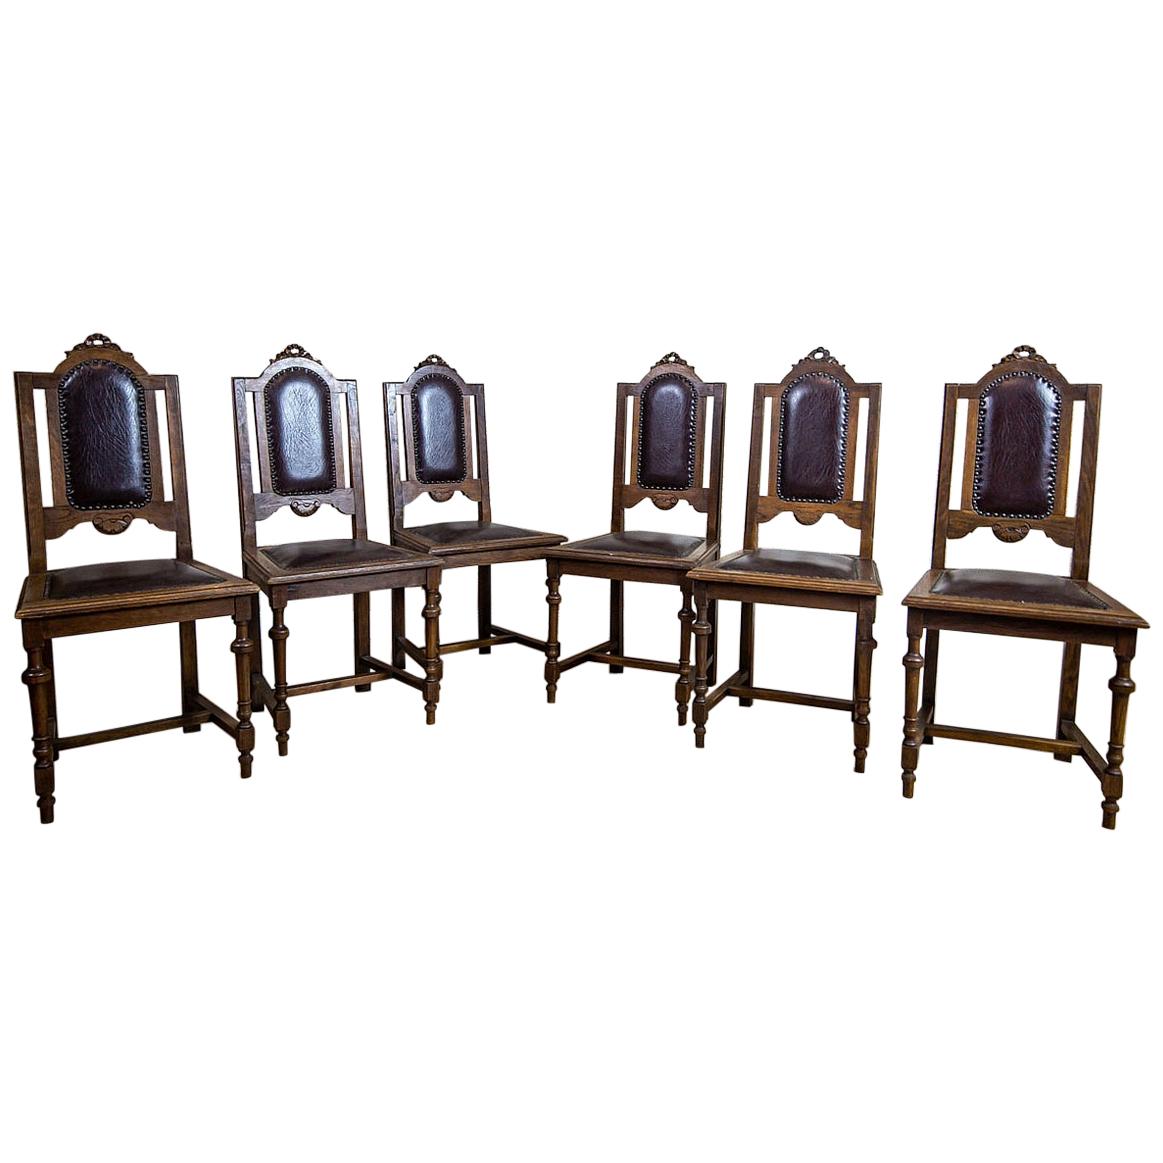 Set of Six Oak Dining Chairs from the Turn of the 19th and 20th Centuries